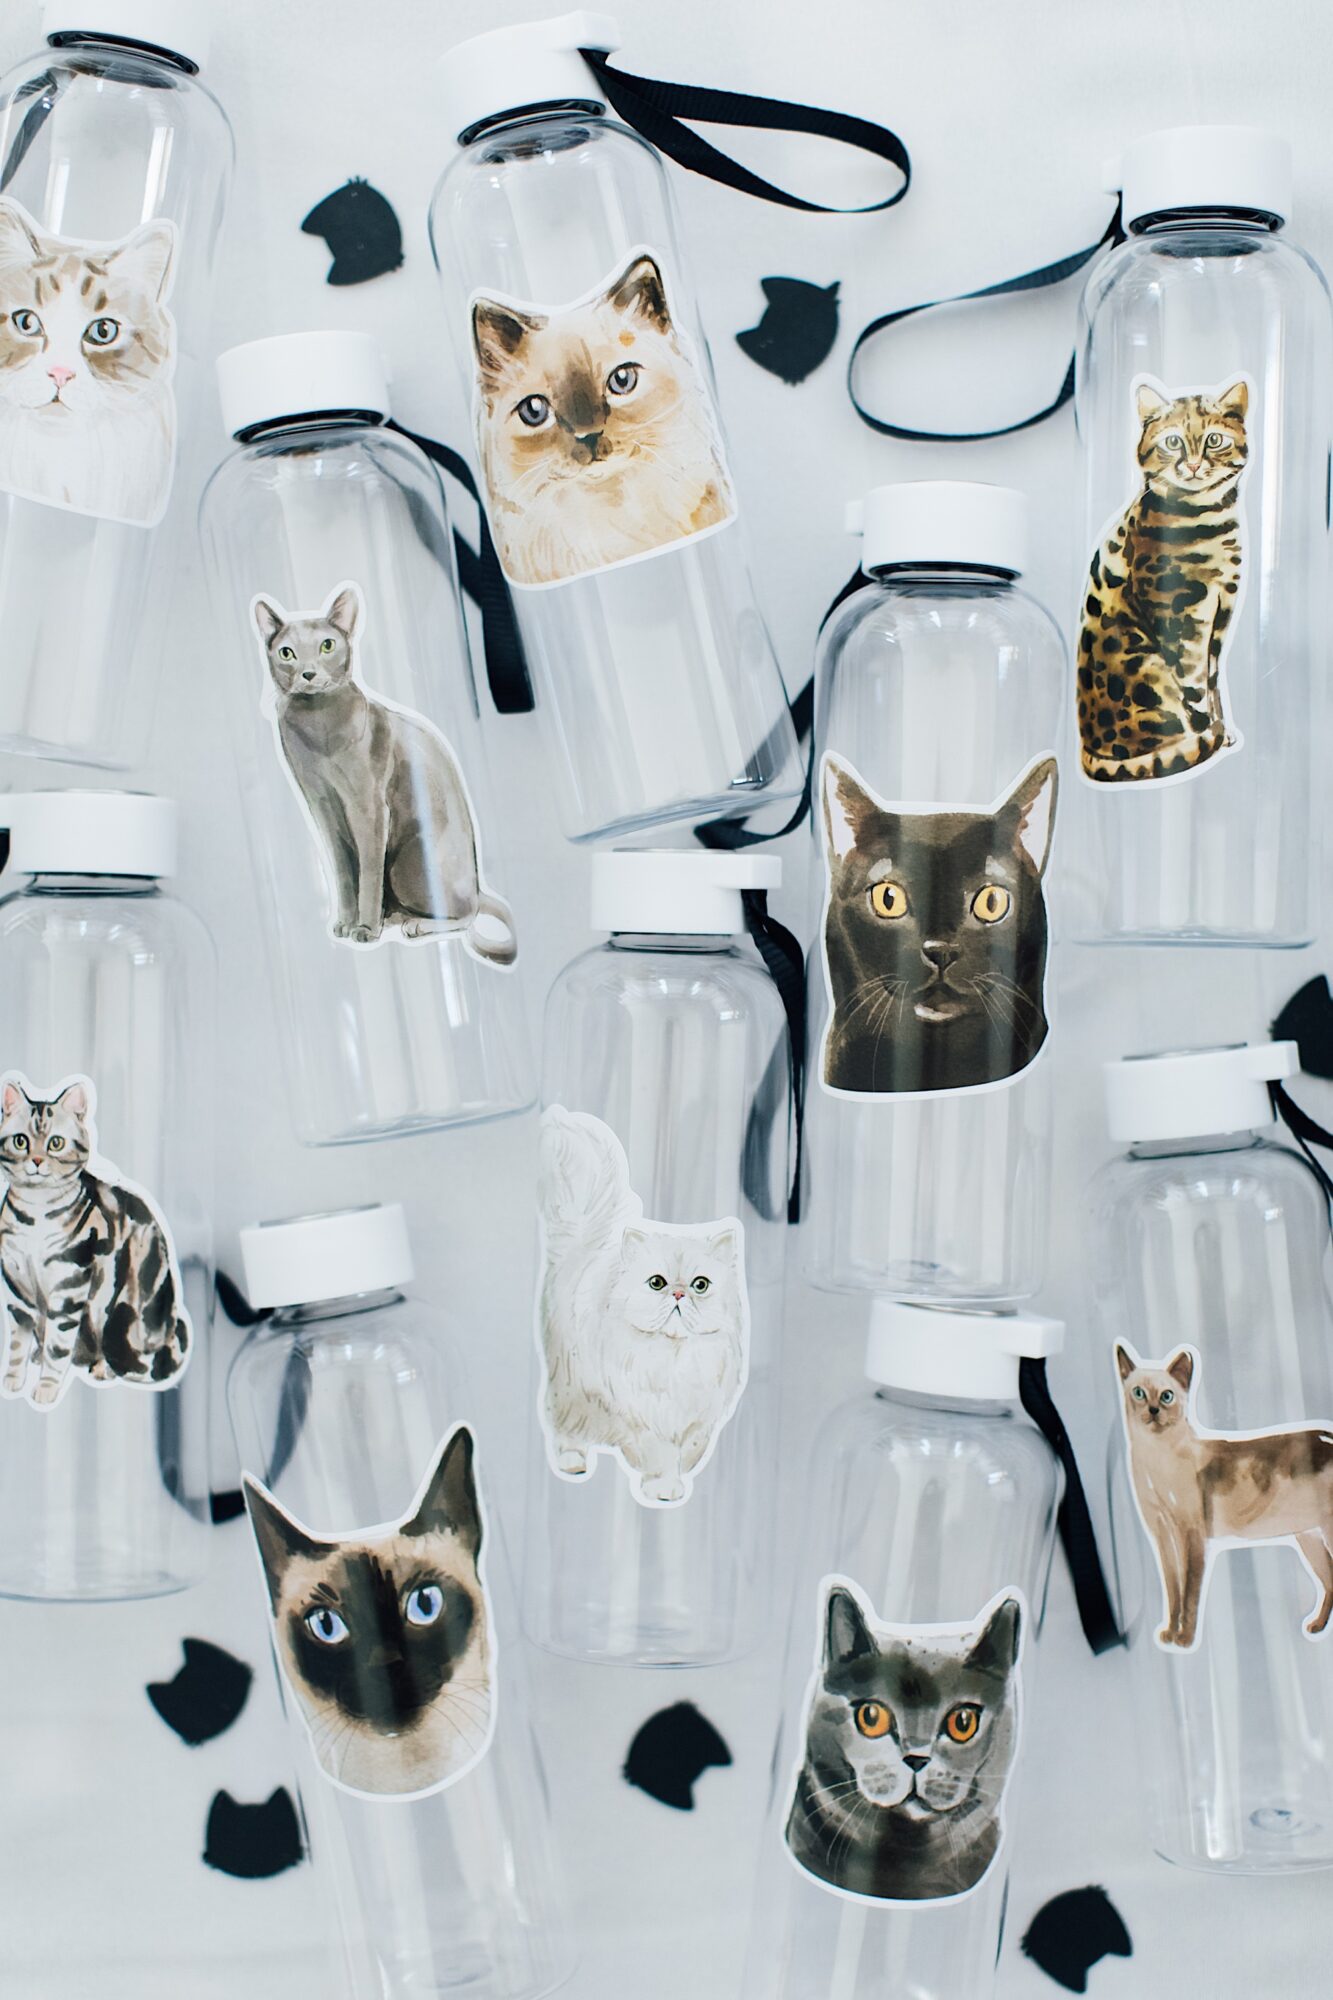 customized water bottles with cat stickers for cat party